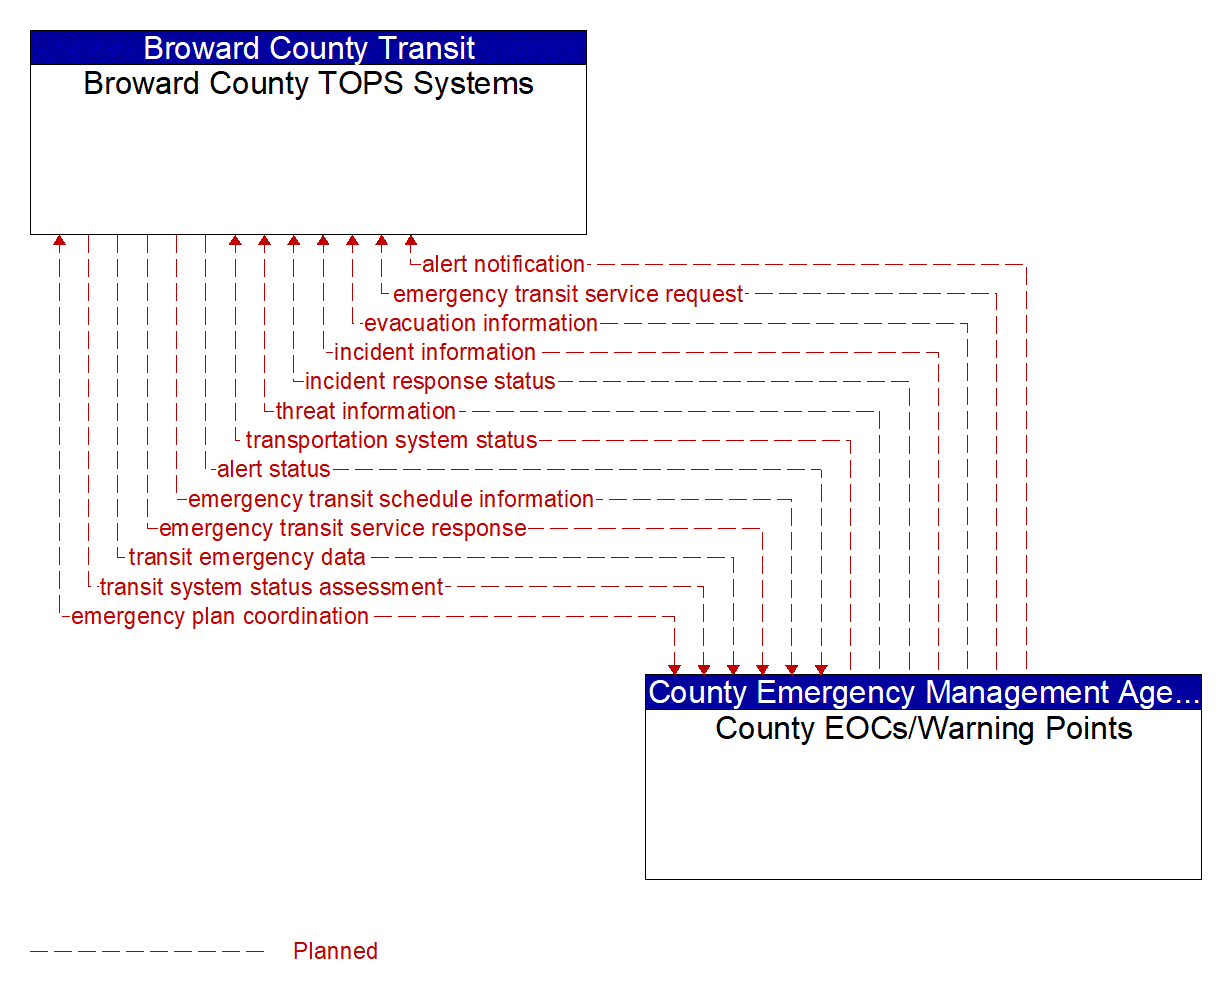 Architecture Flow Diagram: County EOCs/Warning Points <--> Broward County TOPS Systems